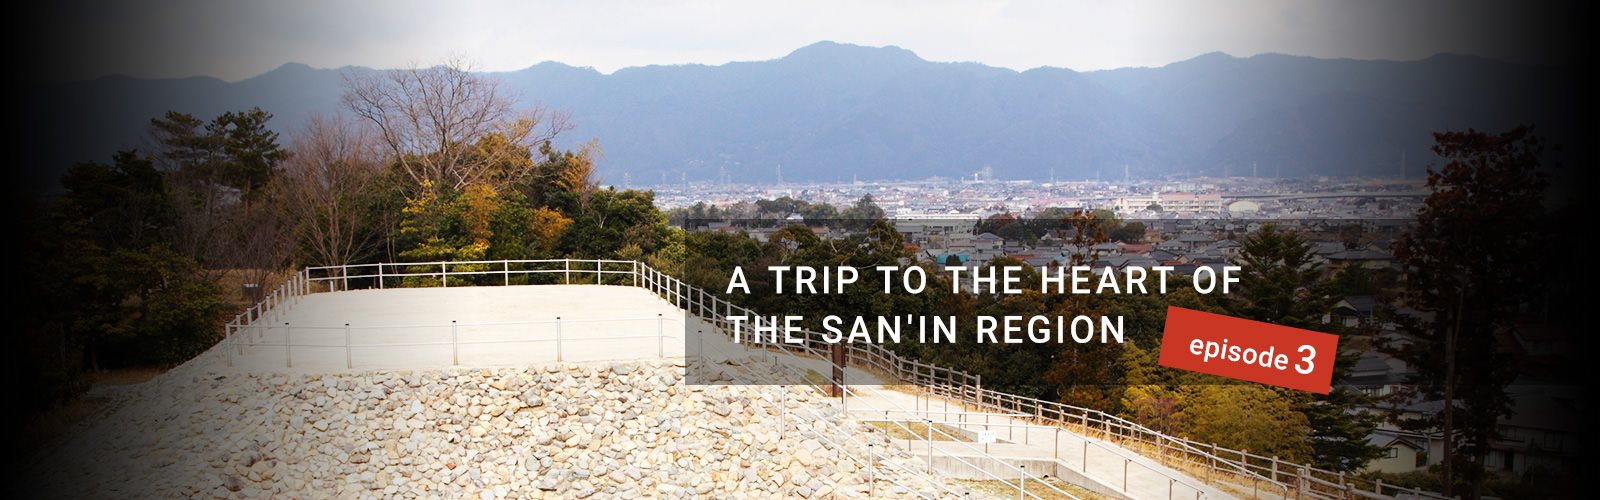 Story - Episode3 | A TRIP TO THE HEART OF THE SAN'IN REGION